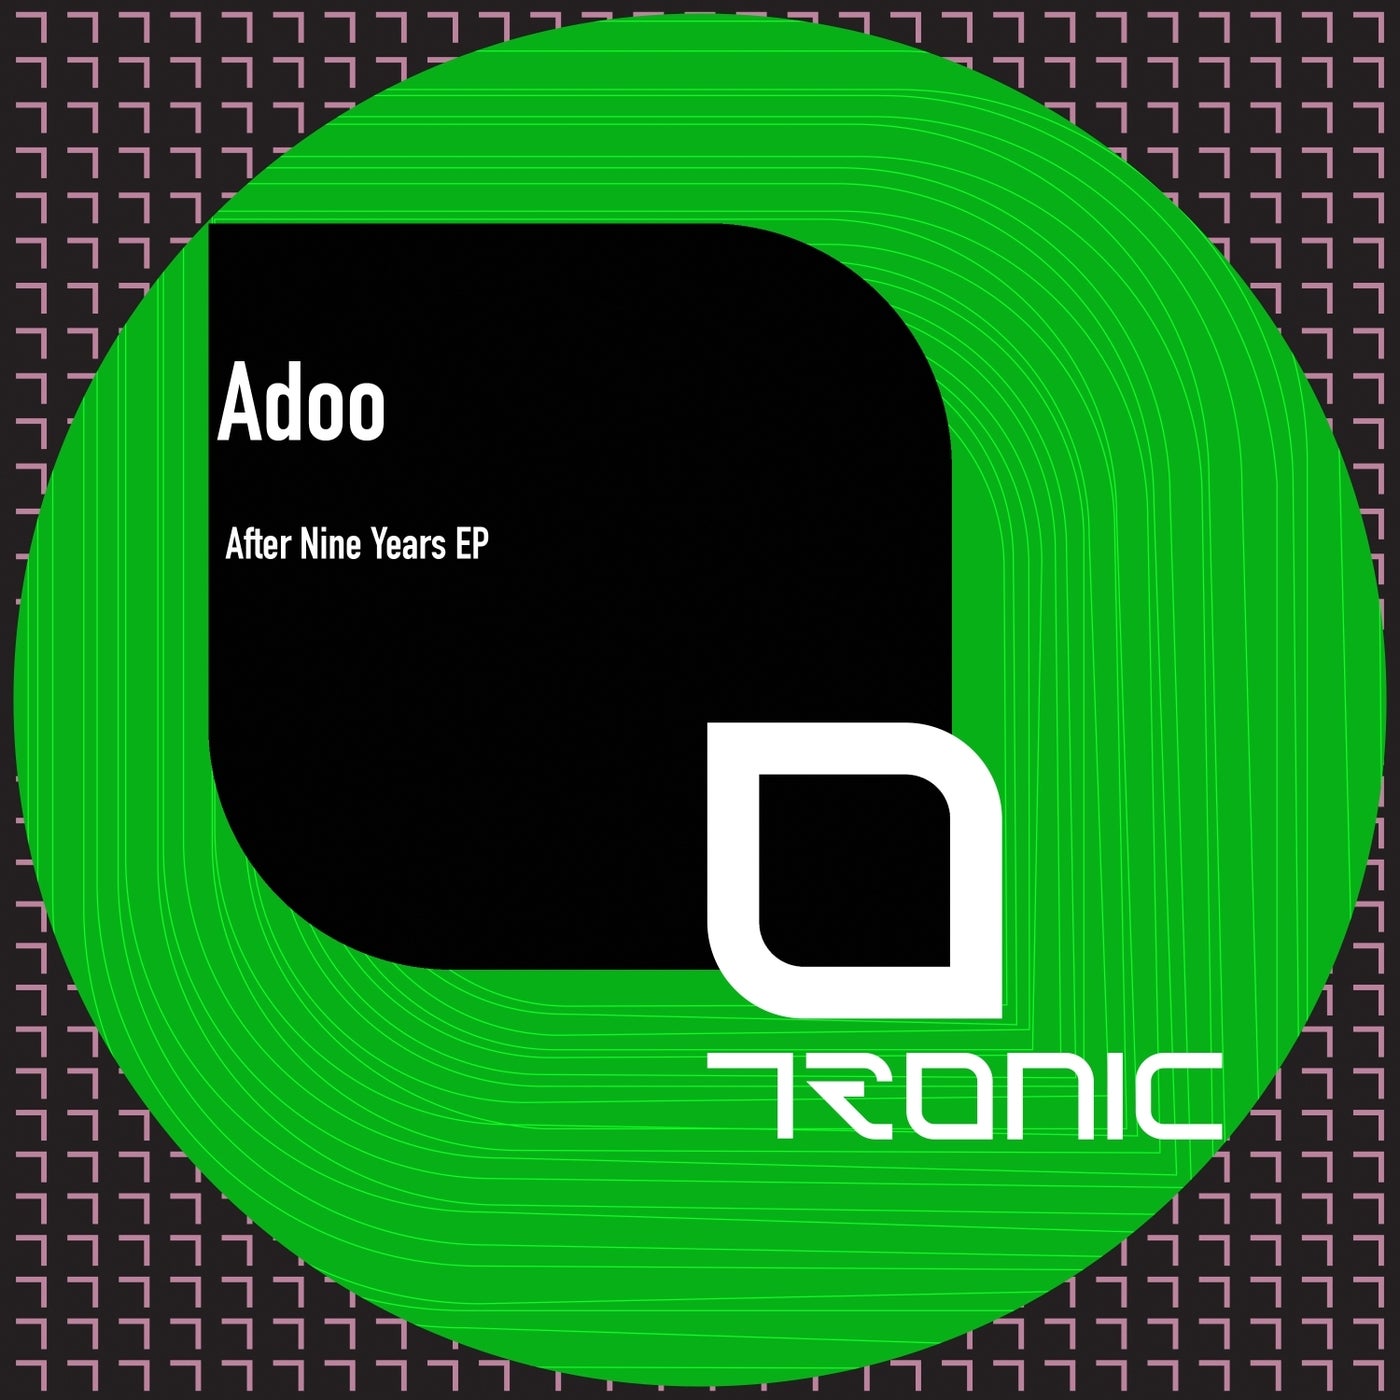 image cover: Adoo - After Nine Years EP on Tronic